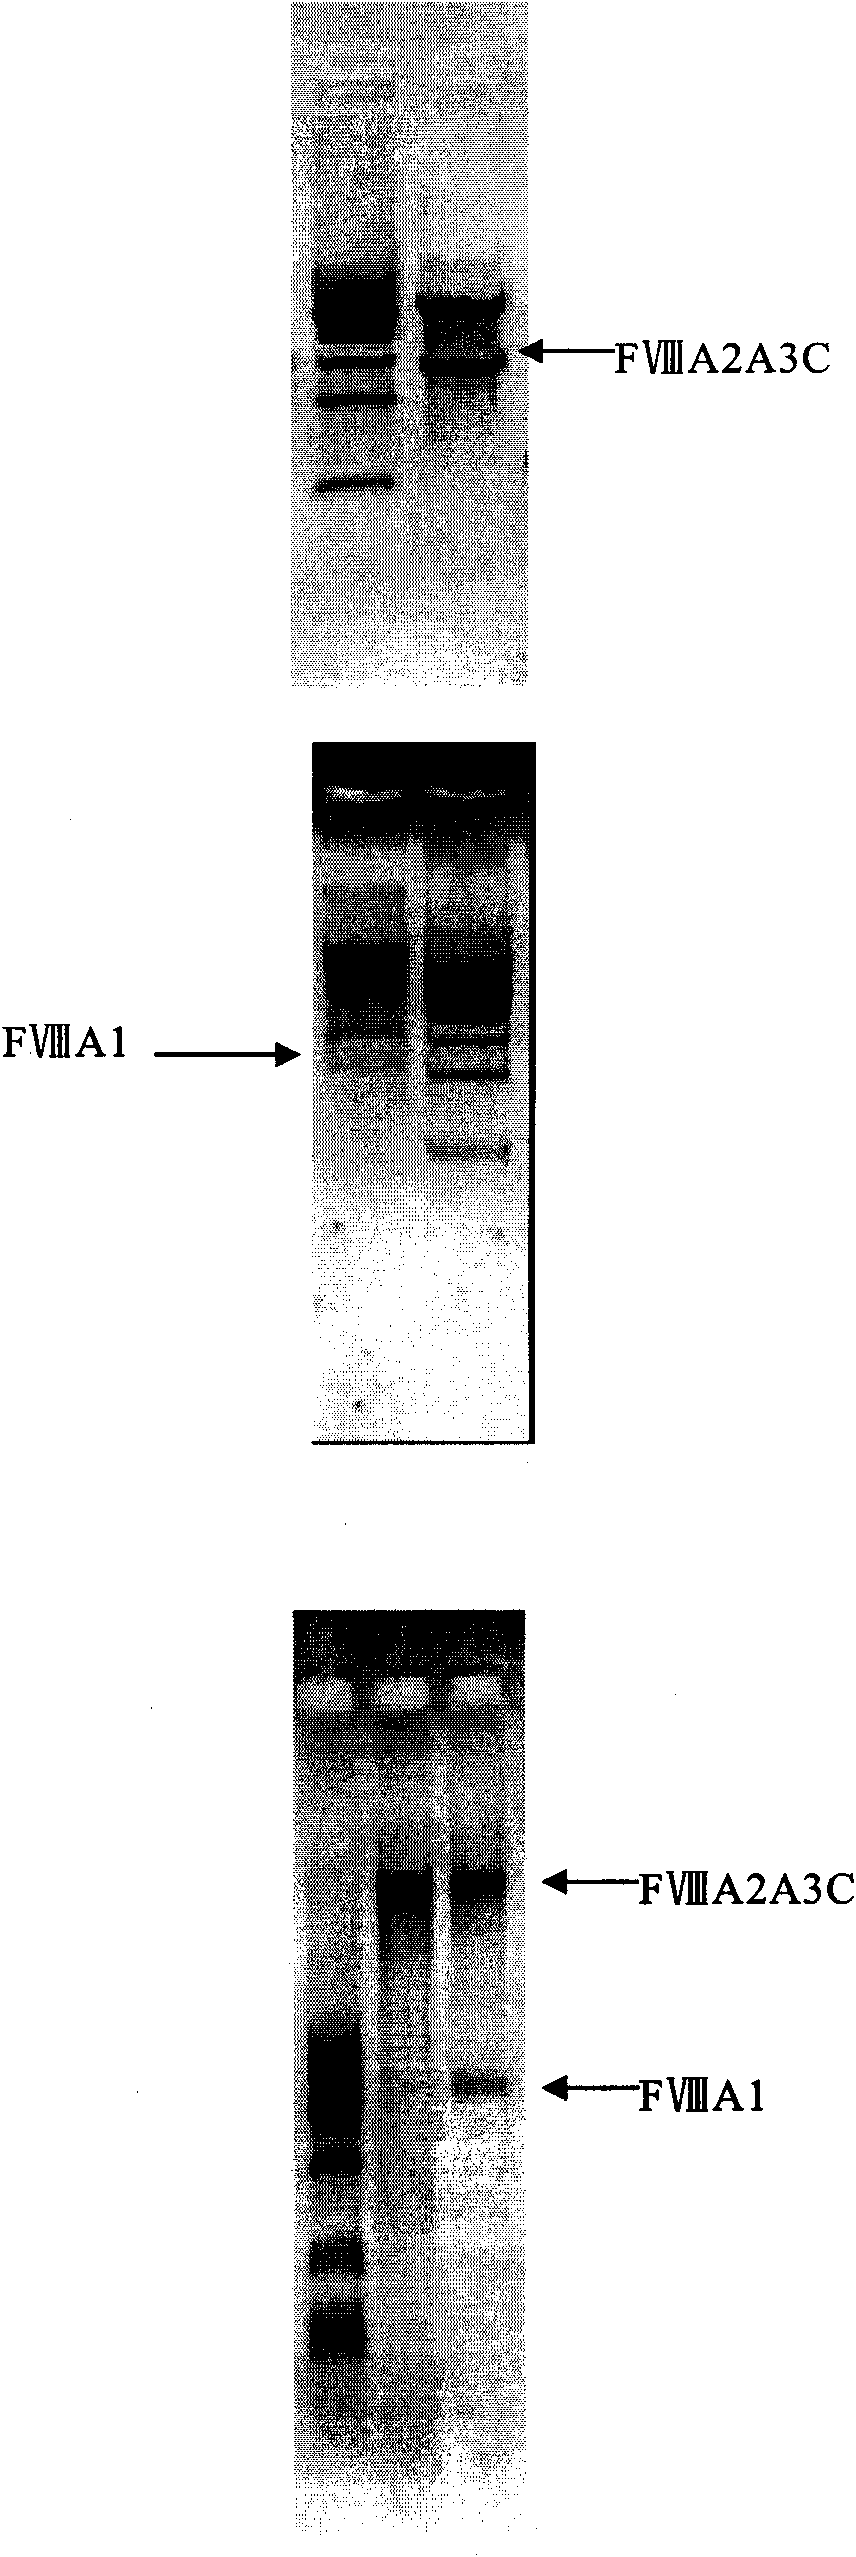 Method for expressing and producing recombinant human blood coagulation factors VIII in animal cells